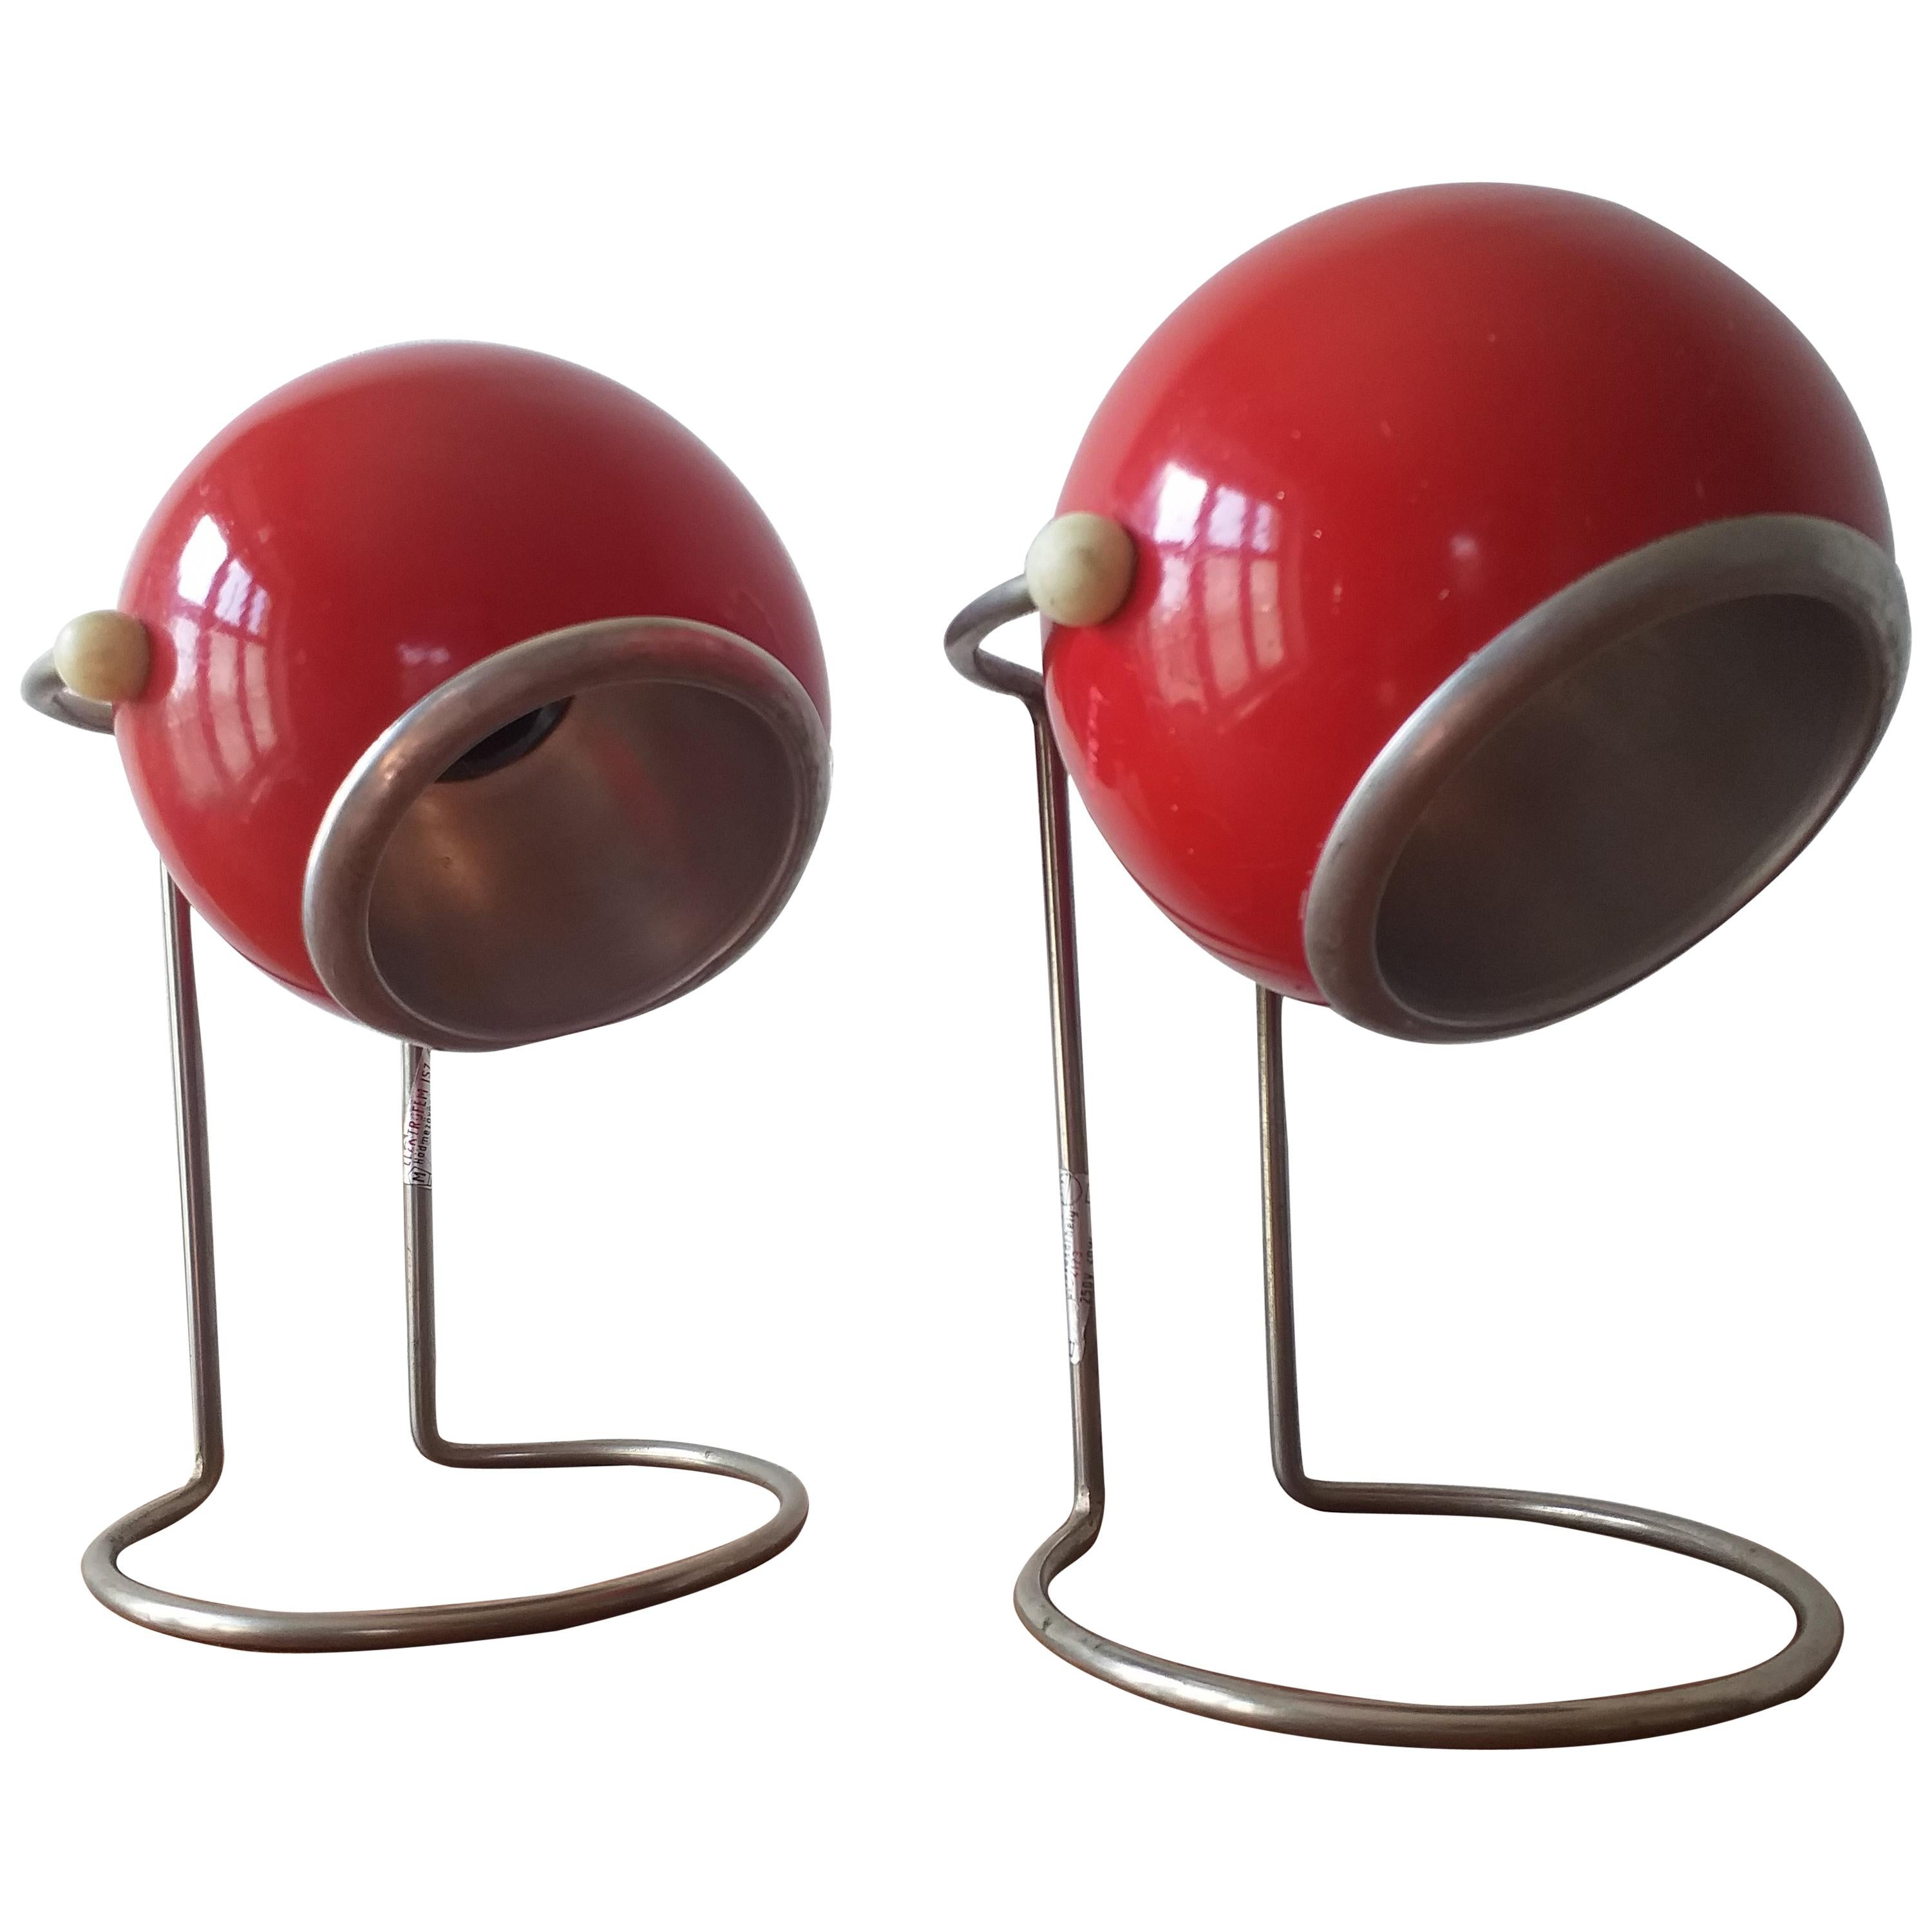 Pair of Mid Century Table Lamps, 1970s